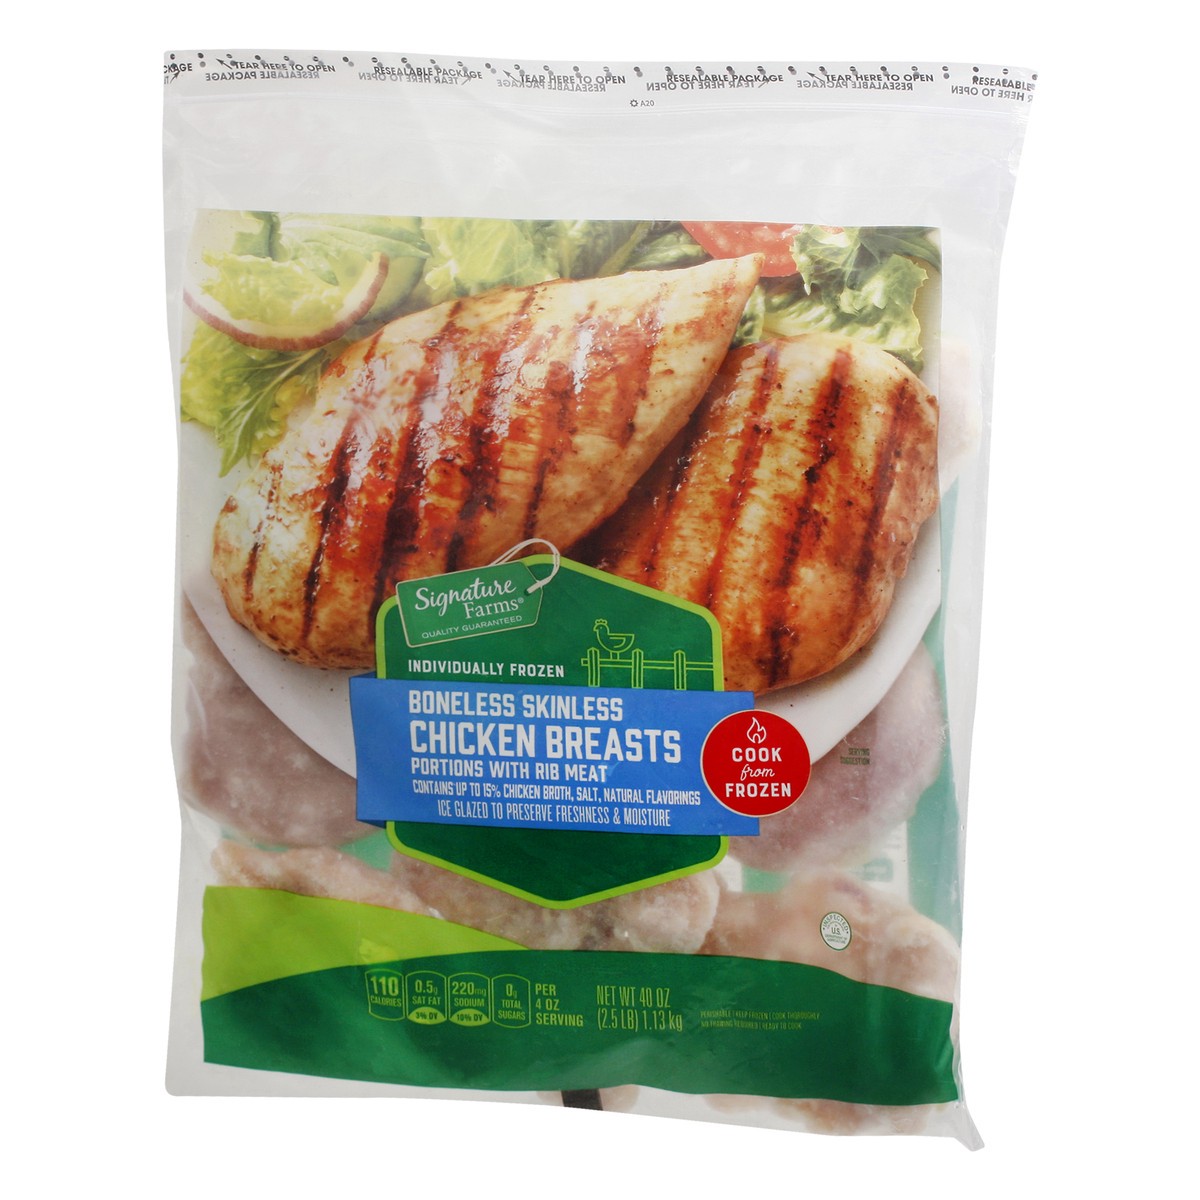 slide 4 of 9, Signature Select Signature Farms Individually Frozen Boneless Skinless Chicken Breasts Portions with Rib Meat 40 oz Frozen, 1.13 kg